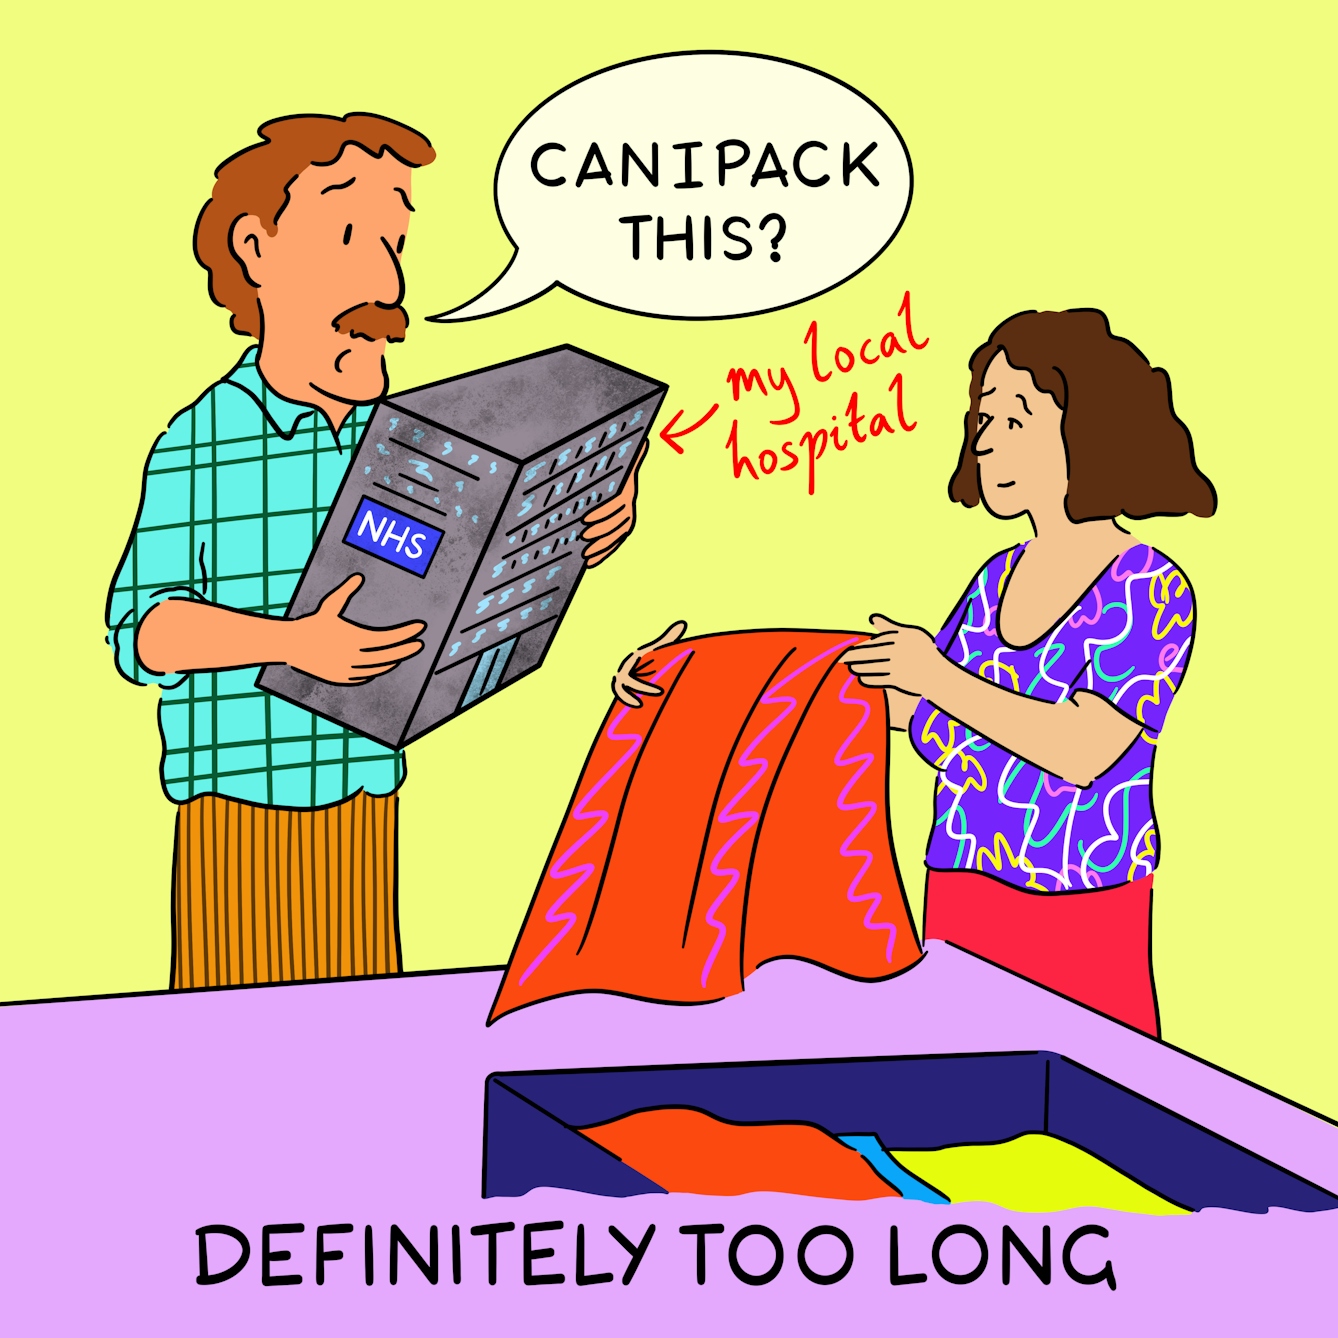 Panel 4 of a four-panel comic drawn digitally: a man with a plaid shirt and moustache anxiously looks towards a woman with short brown hair who is packing a towel into a suitcase. He clutches a little building with an NHS sign, about the size of a shoebox, labelled "my local hospital" and asks "Can I pack this?"
The caption text reads "Definitely too long"